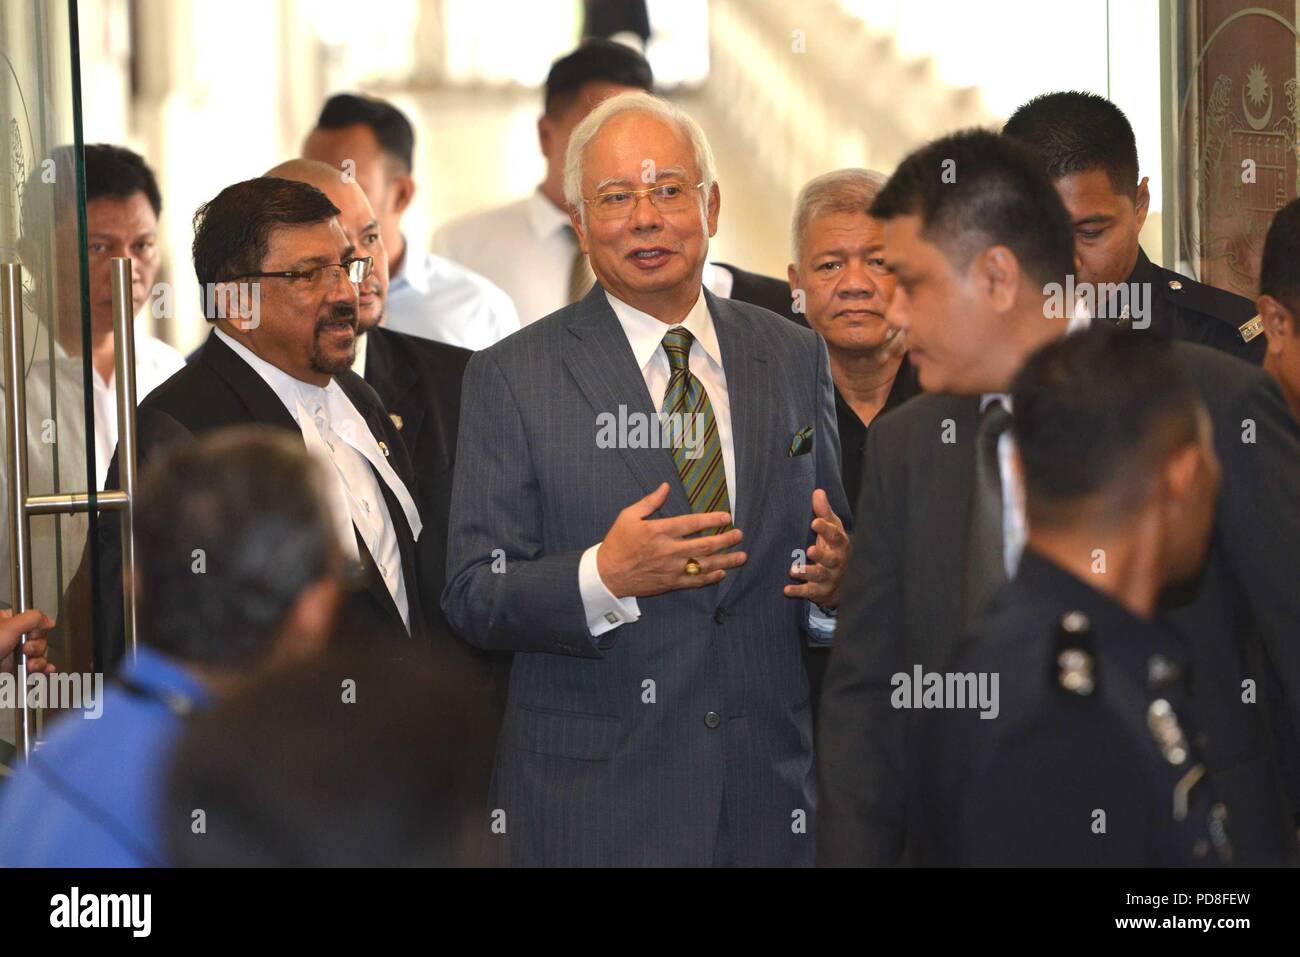 Kuala Lumpur. 8th Aug, 2018. Former Malaysian Prime Minister Najib Razak (C) appears at the Kuala Lumpur Courts complex in Kuala Lumpur in Malaysia, Aug. 8, 2018. Former Malaysian Prime Minister Najib Razak on Wednesday was charged with three offenses related to money-laundering and anti-terrorism financing, in addition to several counts of criminal breach of trust and corruption charges that were served in early July. Credit: Chong Voon Chung/Xinhua/Alamy Live News Stock Photo